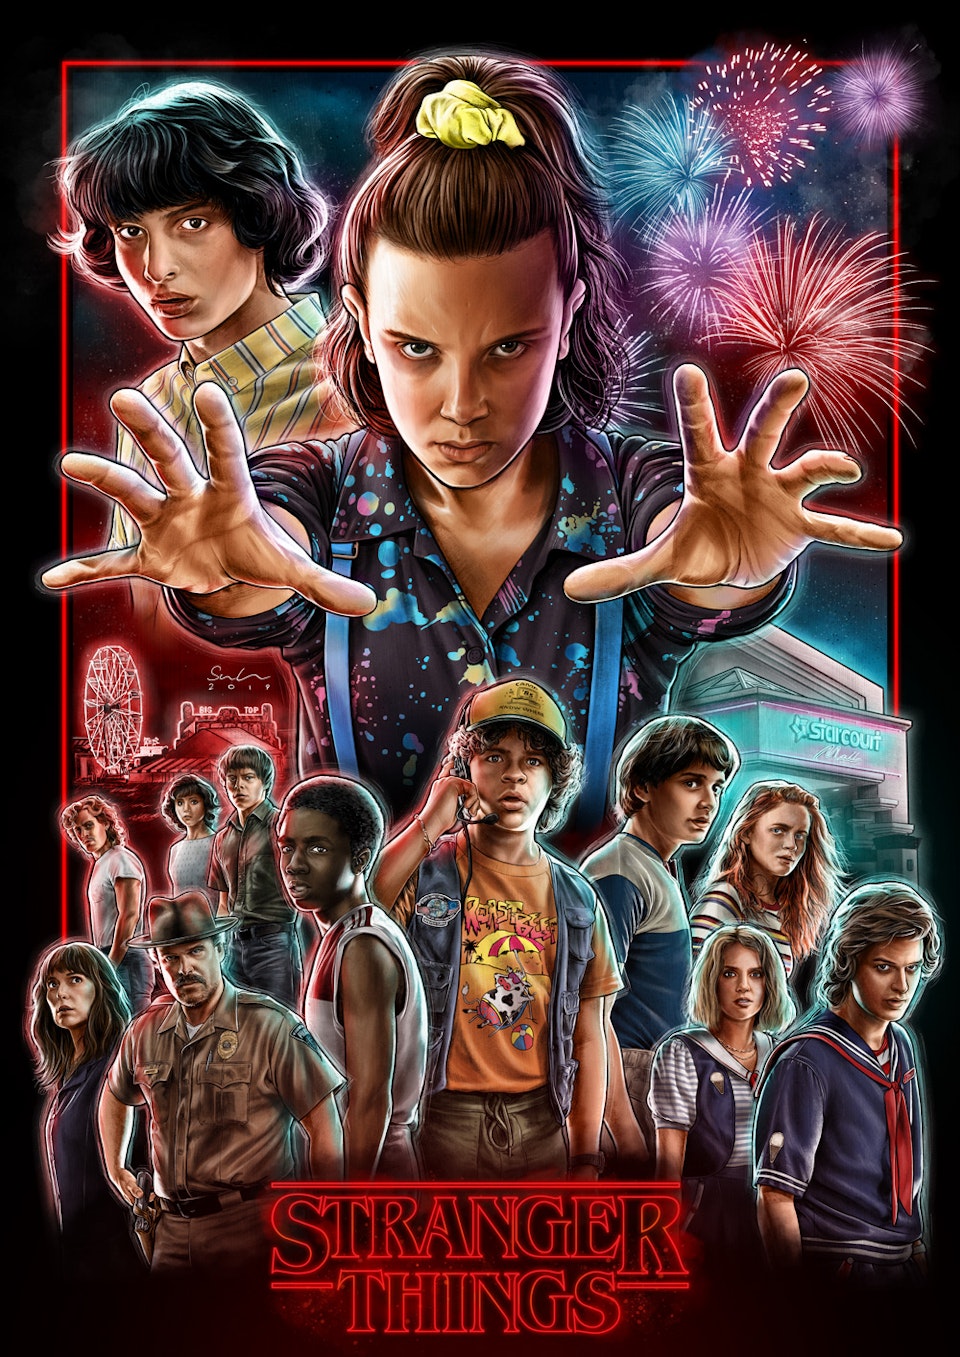 Stranger Things - Stranger Things Poster

Illustrated in Procreate, coloured and assembled in Adobe Photoshop.